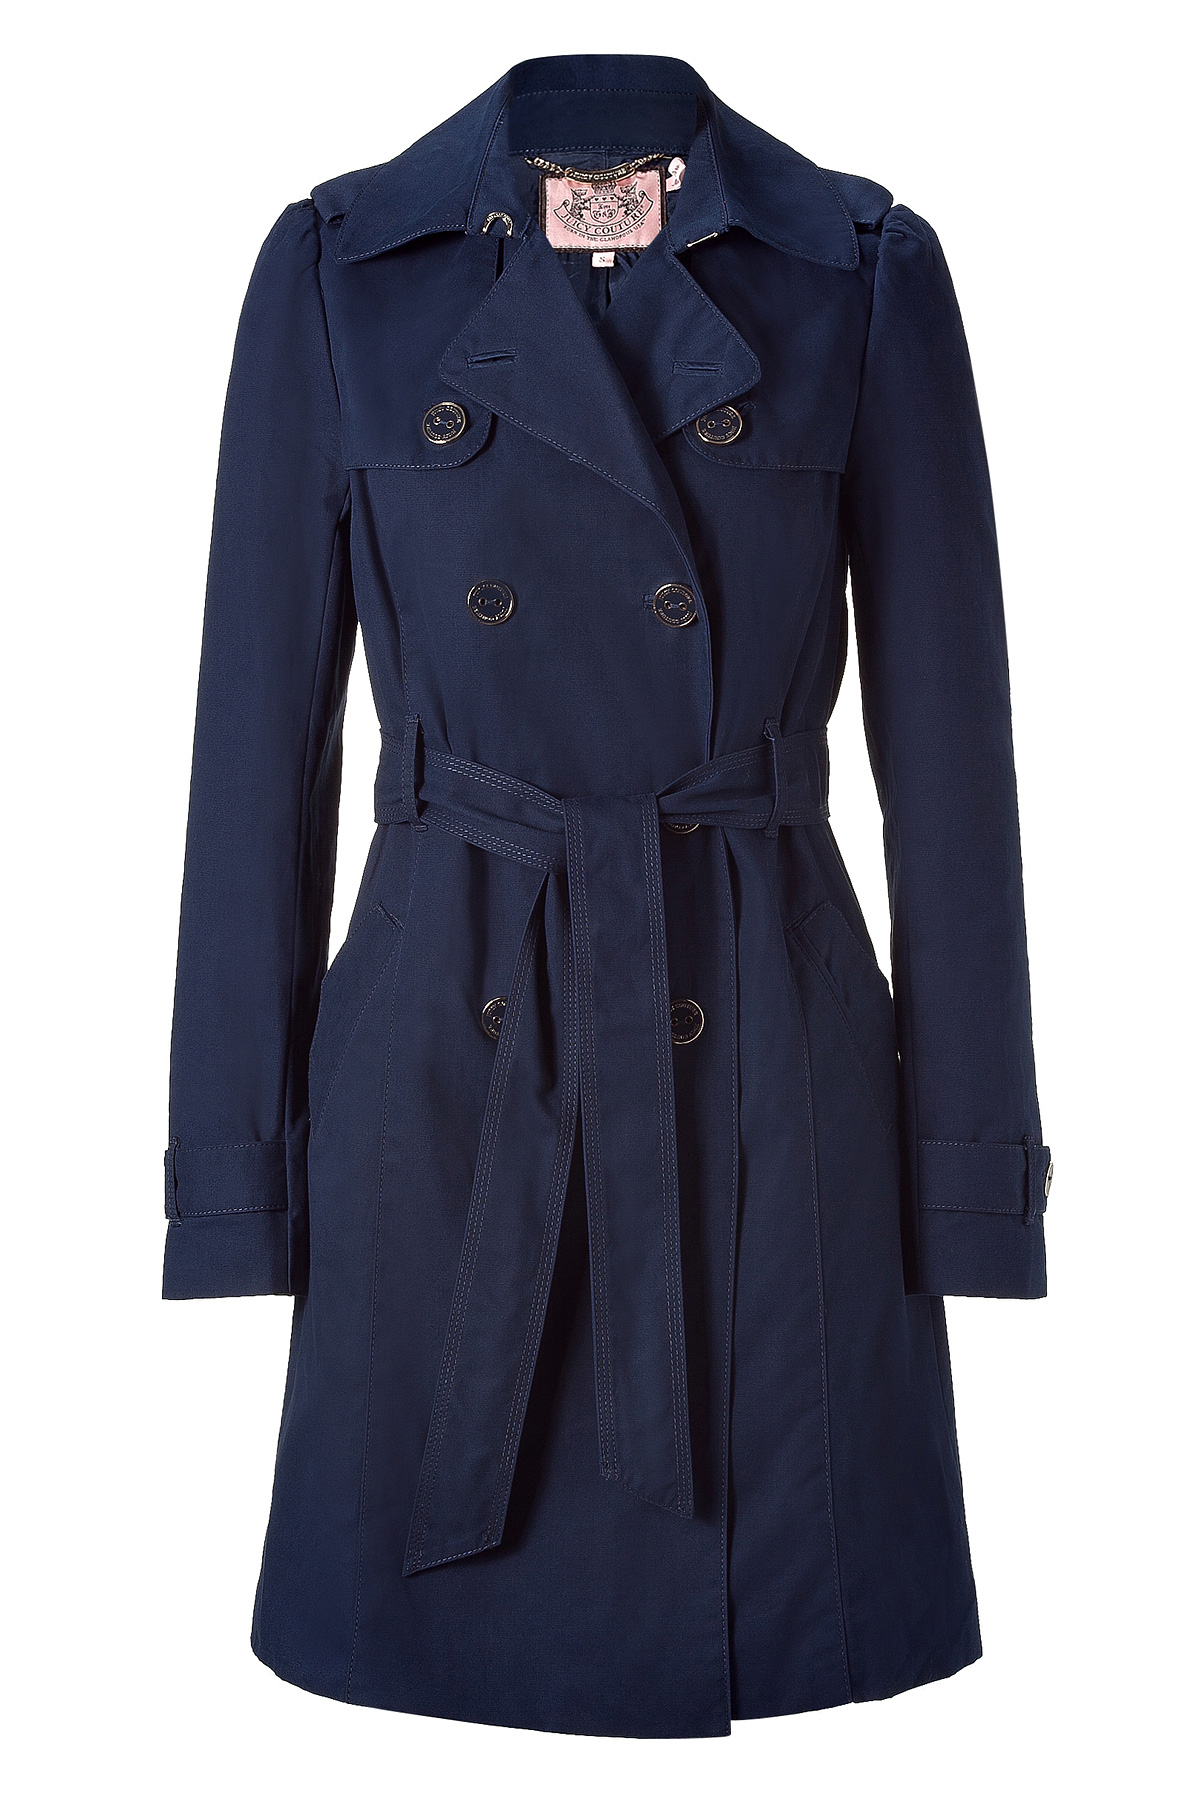 Lyst - Juicy Couture Royal Blue Cotton Twill Trench Coat in Blue